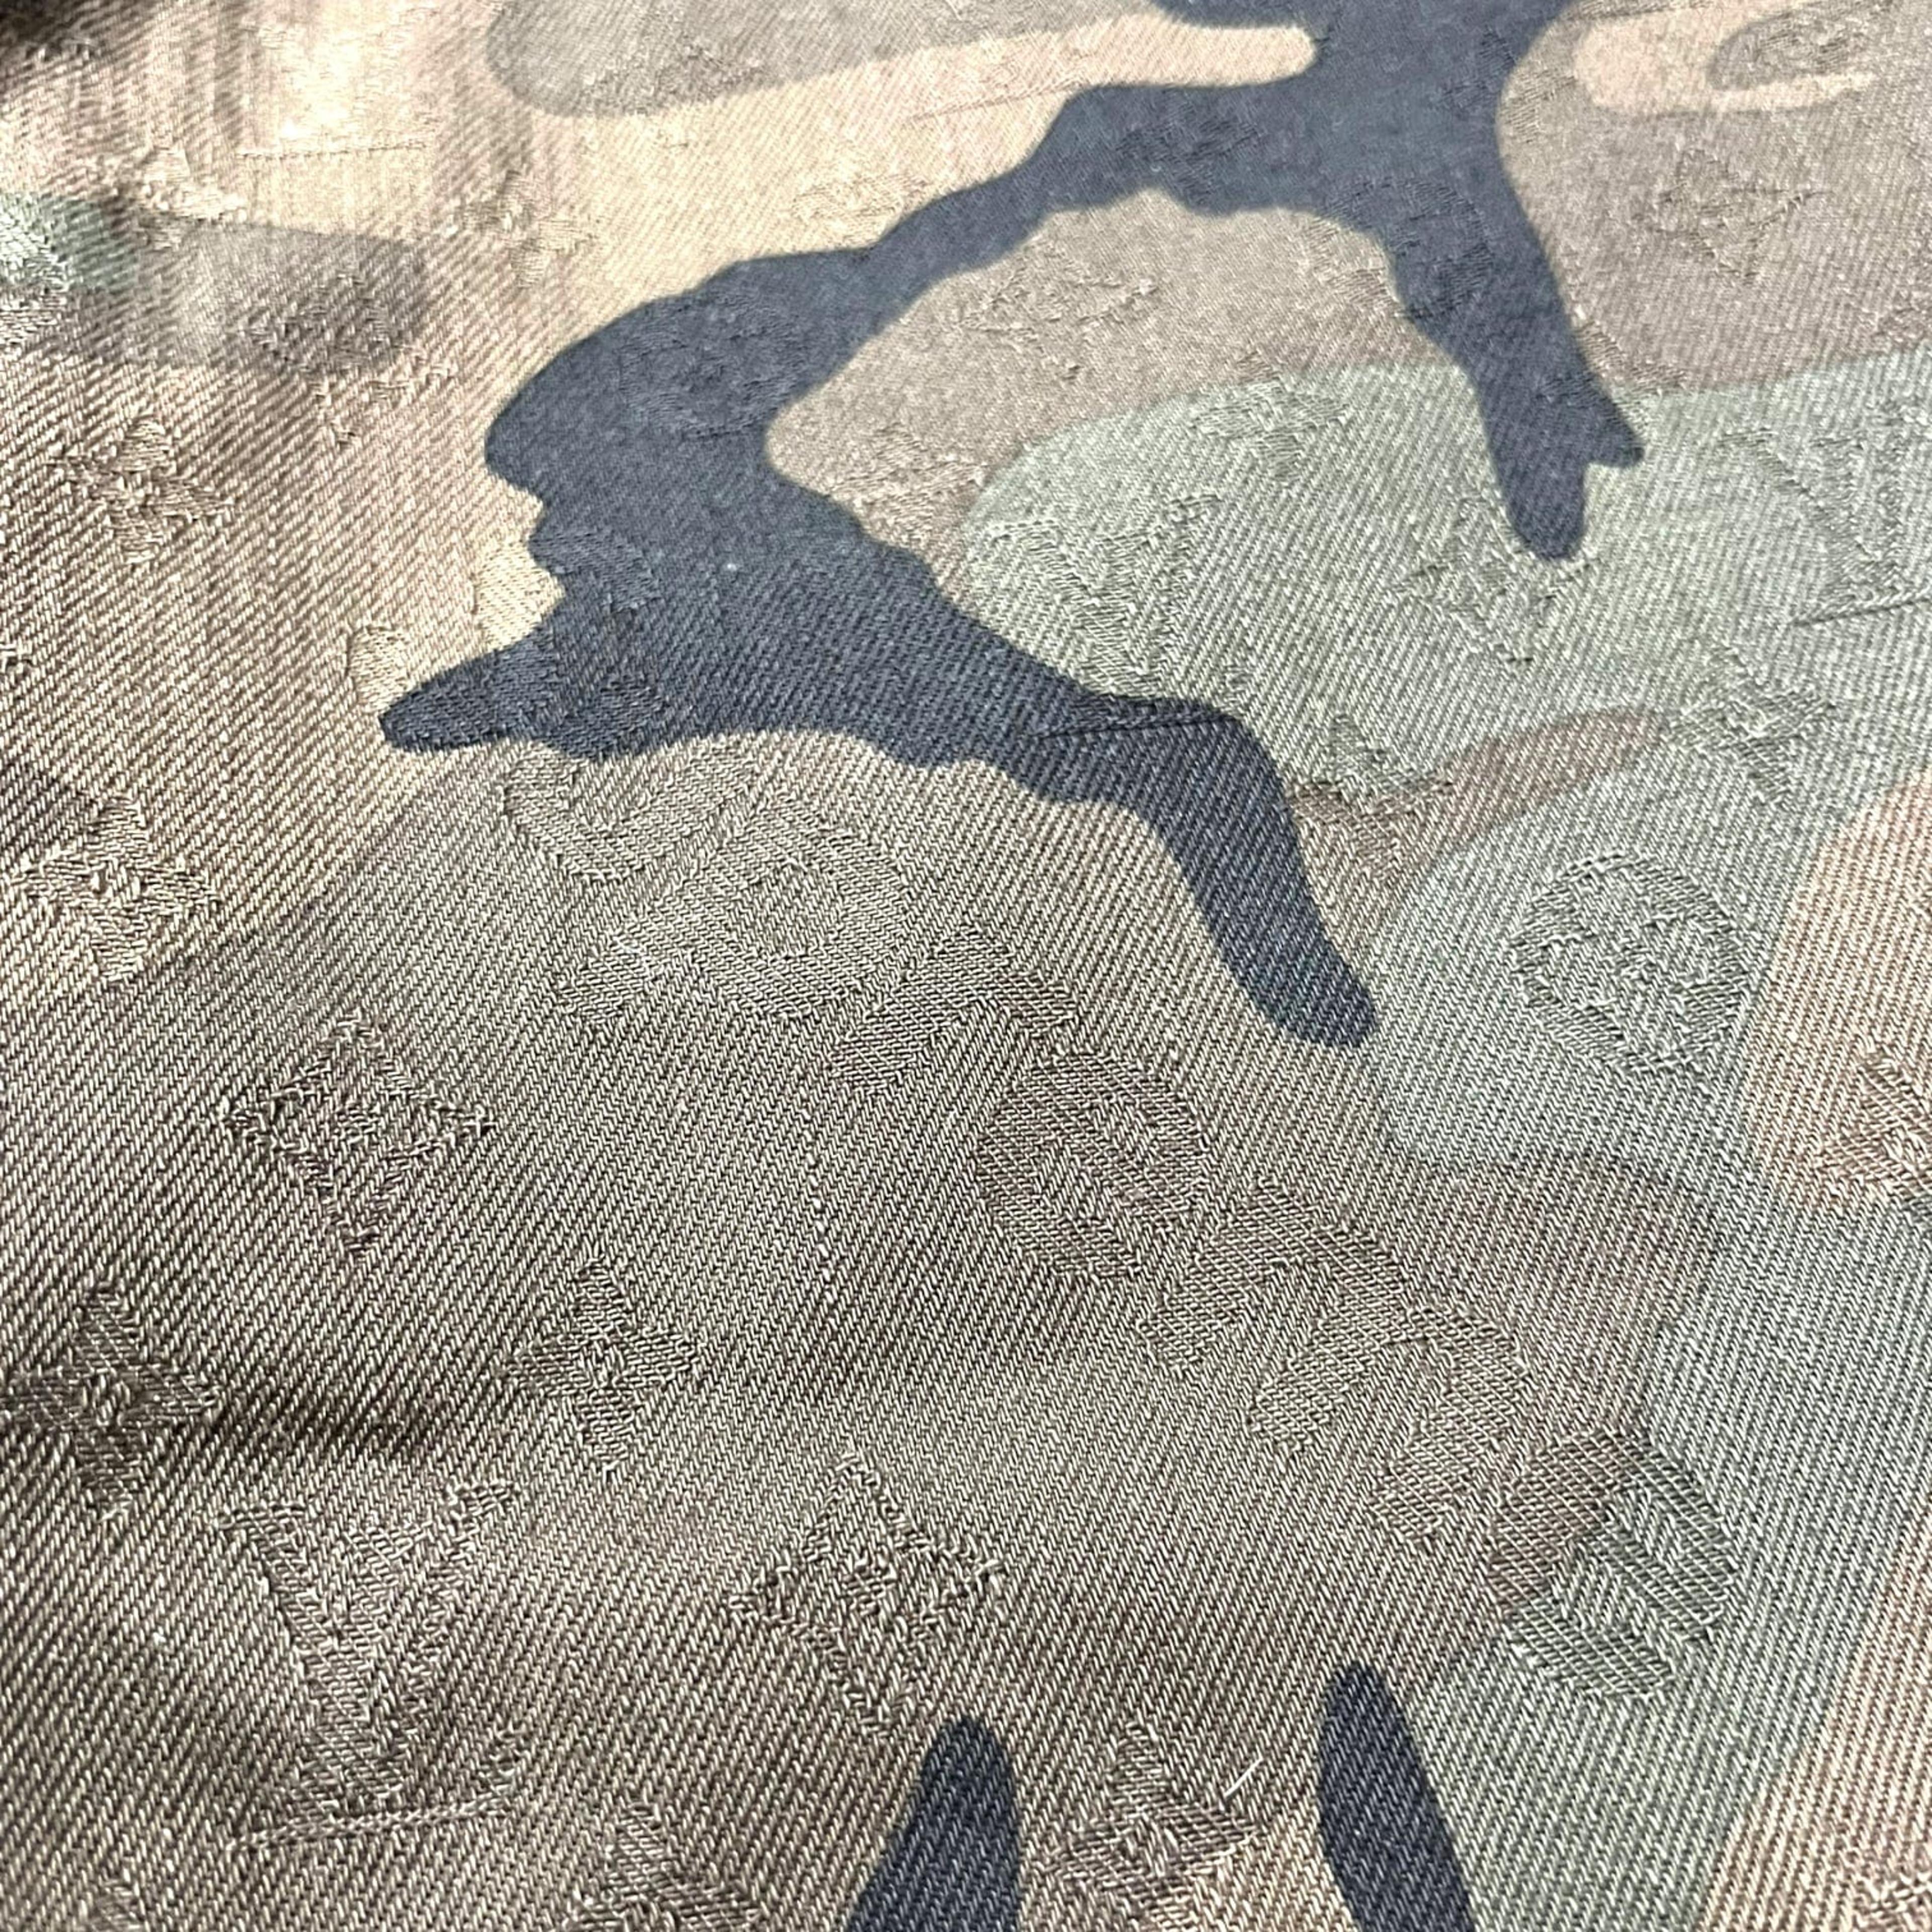 Alternate View 7 of Supreme x Louis Vuitton Jacquard Jeans Camouflage